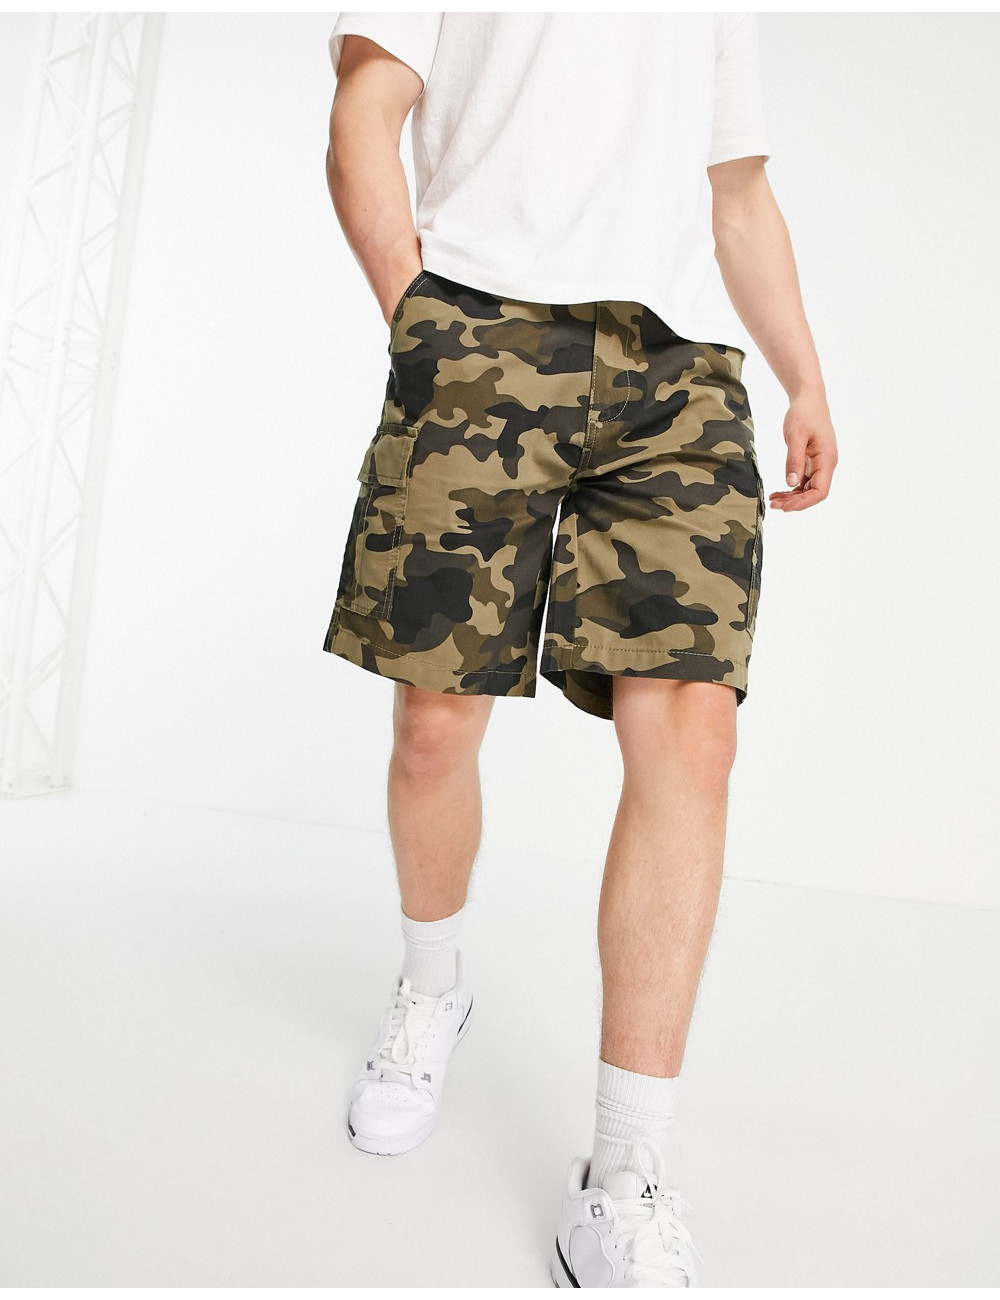 Weekend Offender shorts in...